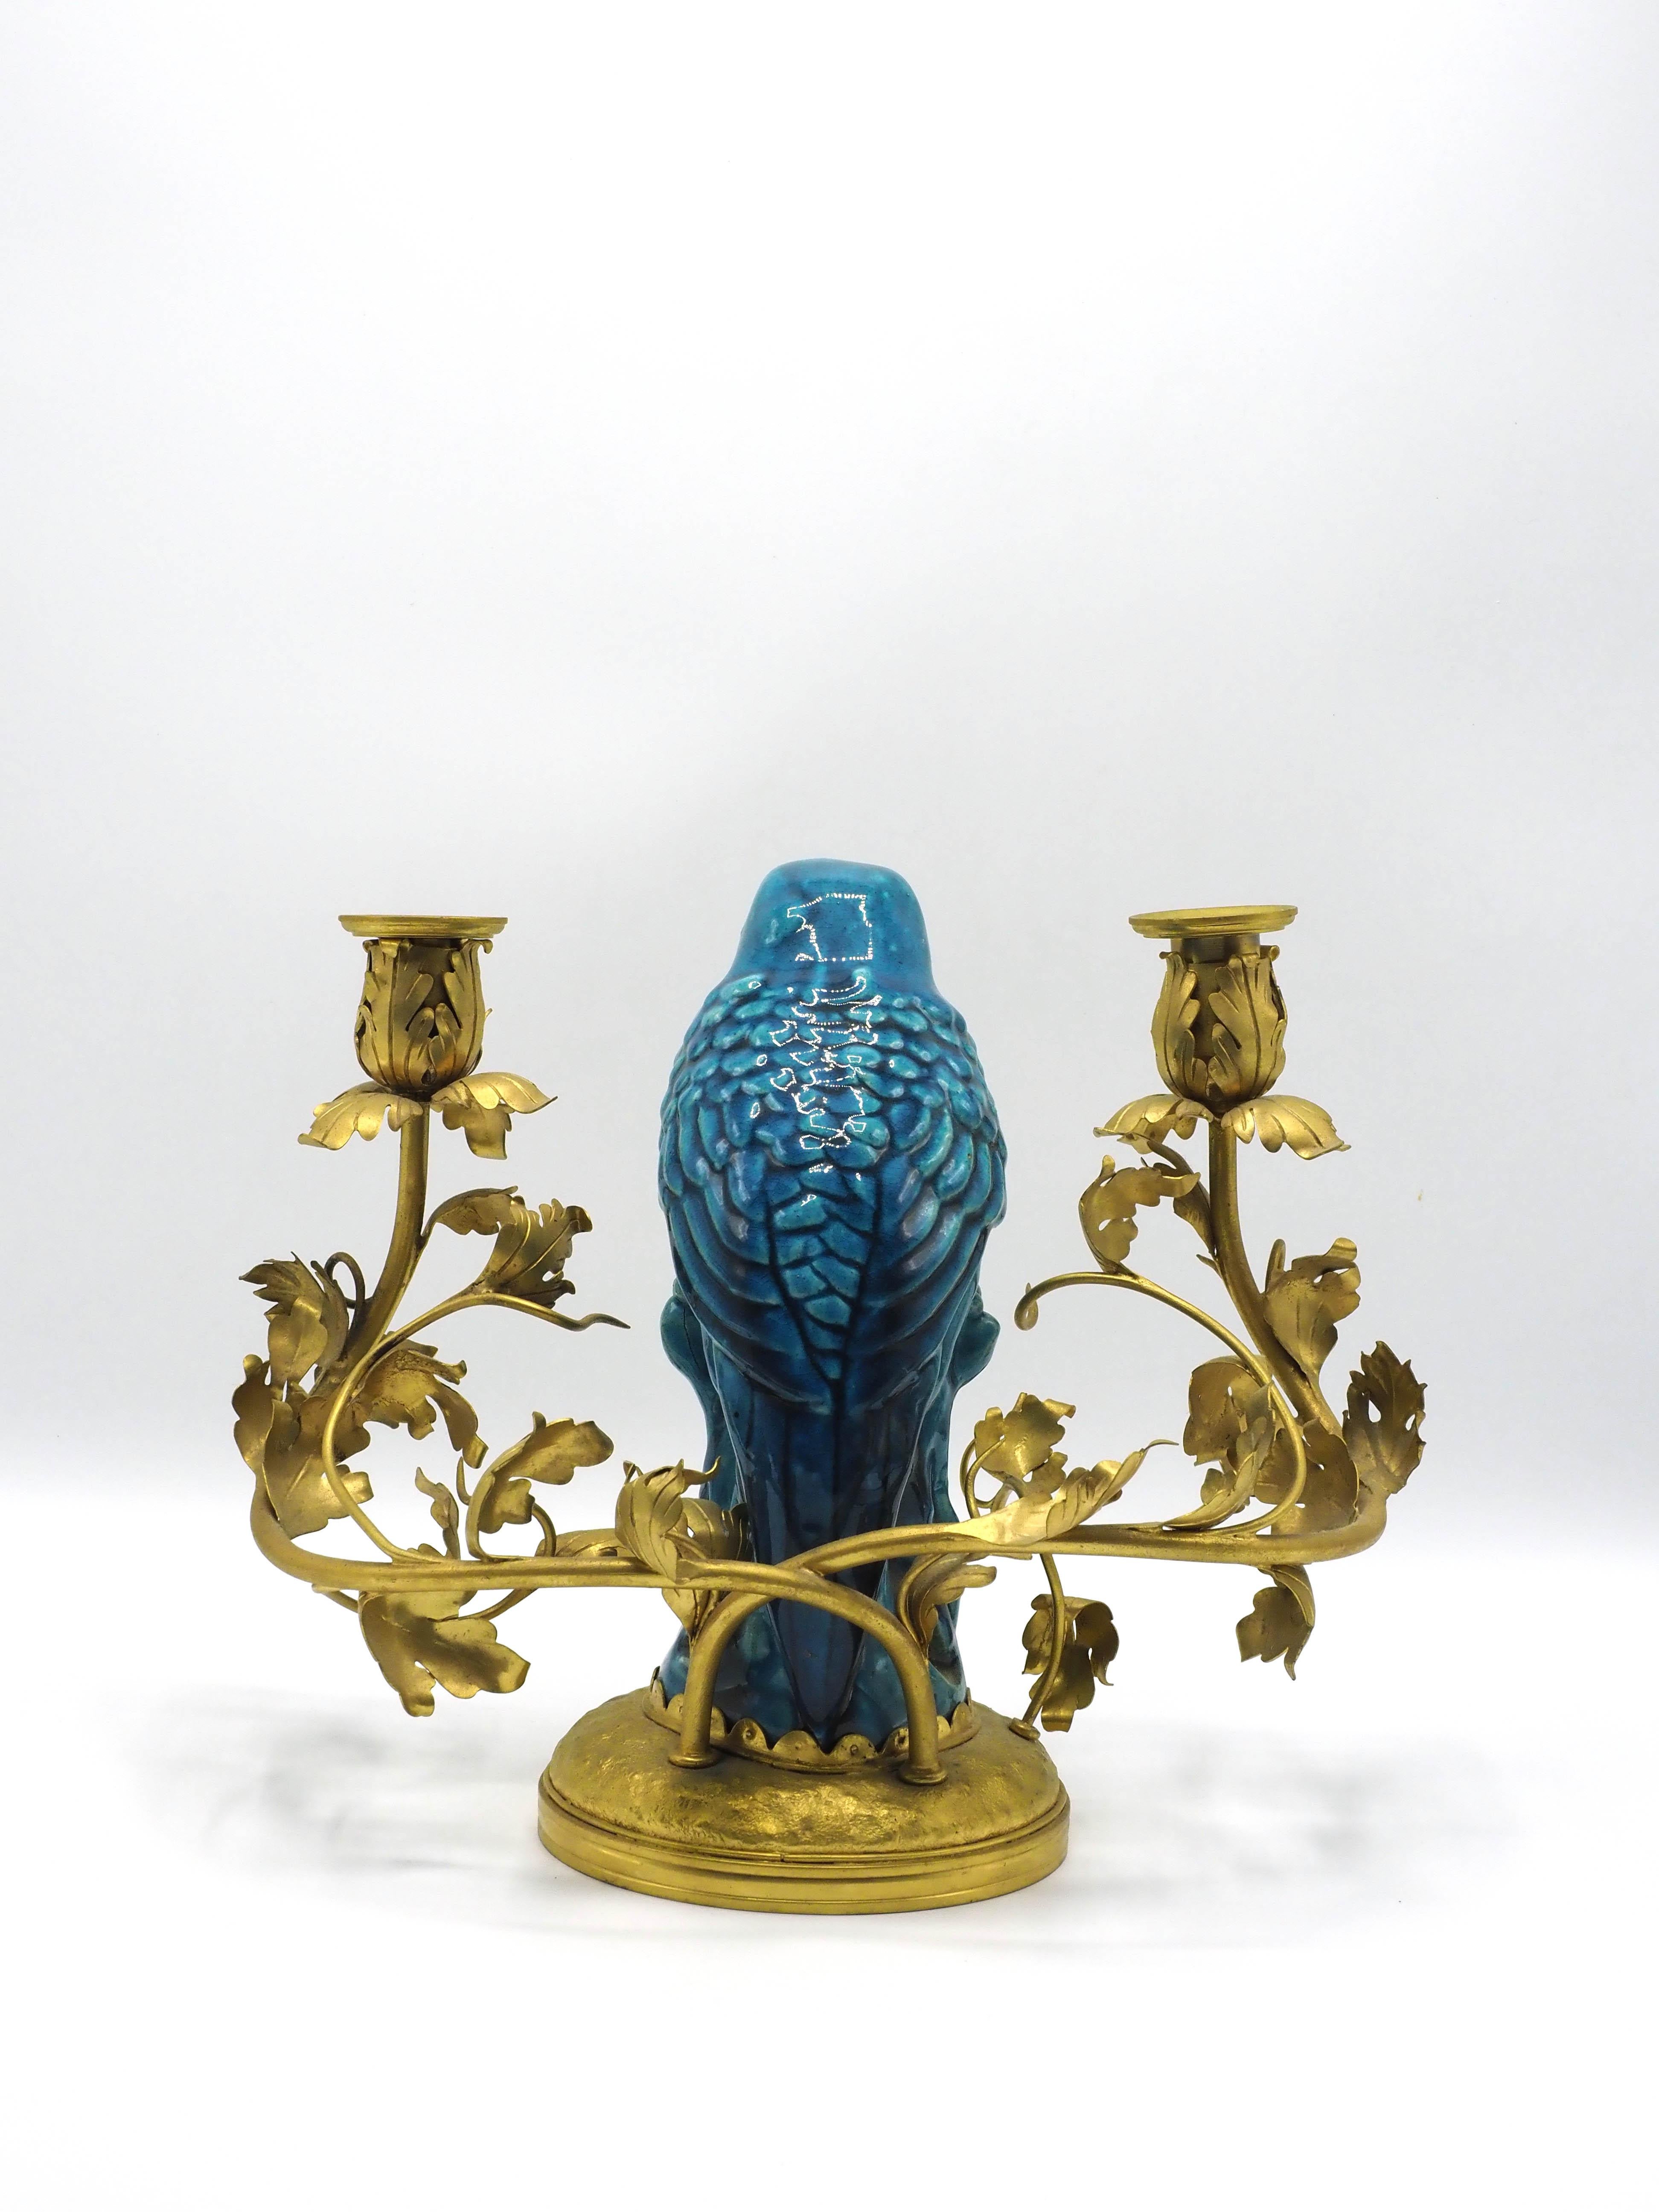 20th Century Original 20th-Century Chinese Chandelier in Gilded Bronze and Blue Porcelain